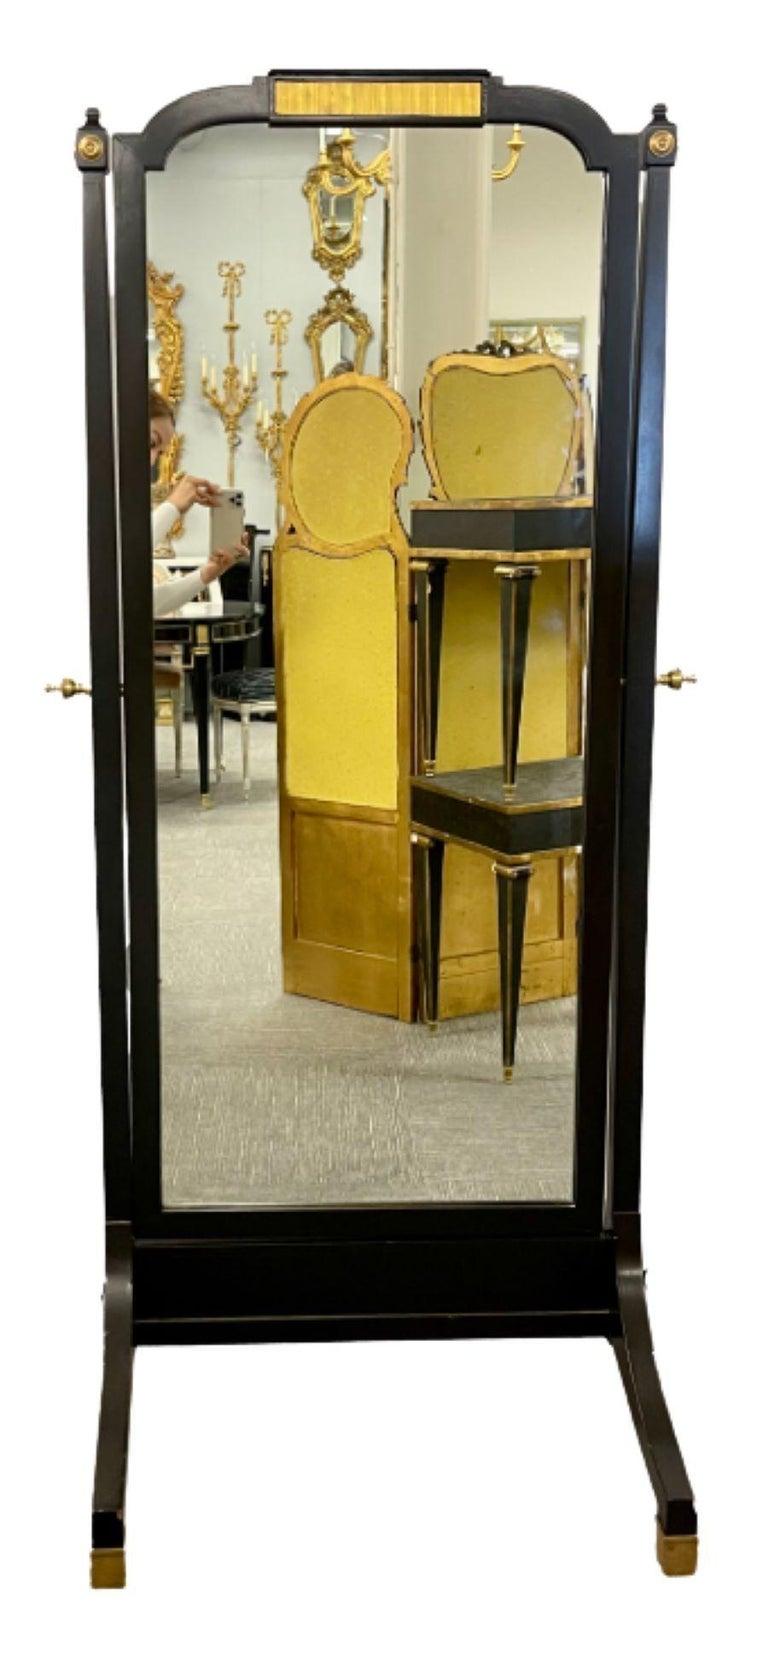 A Jansen fashioned cheval ebonized floor cheval mirror with bronze mounts. This Hollywood Regency floor mirror swings up and down to show the full length of any person who stands in front of it. Having an ebony finish that has been professionally